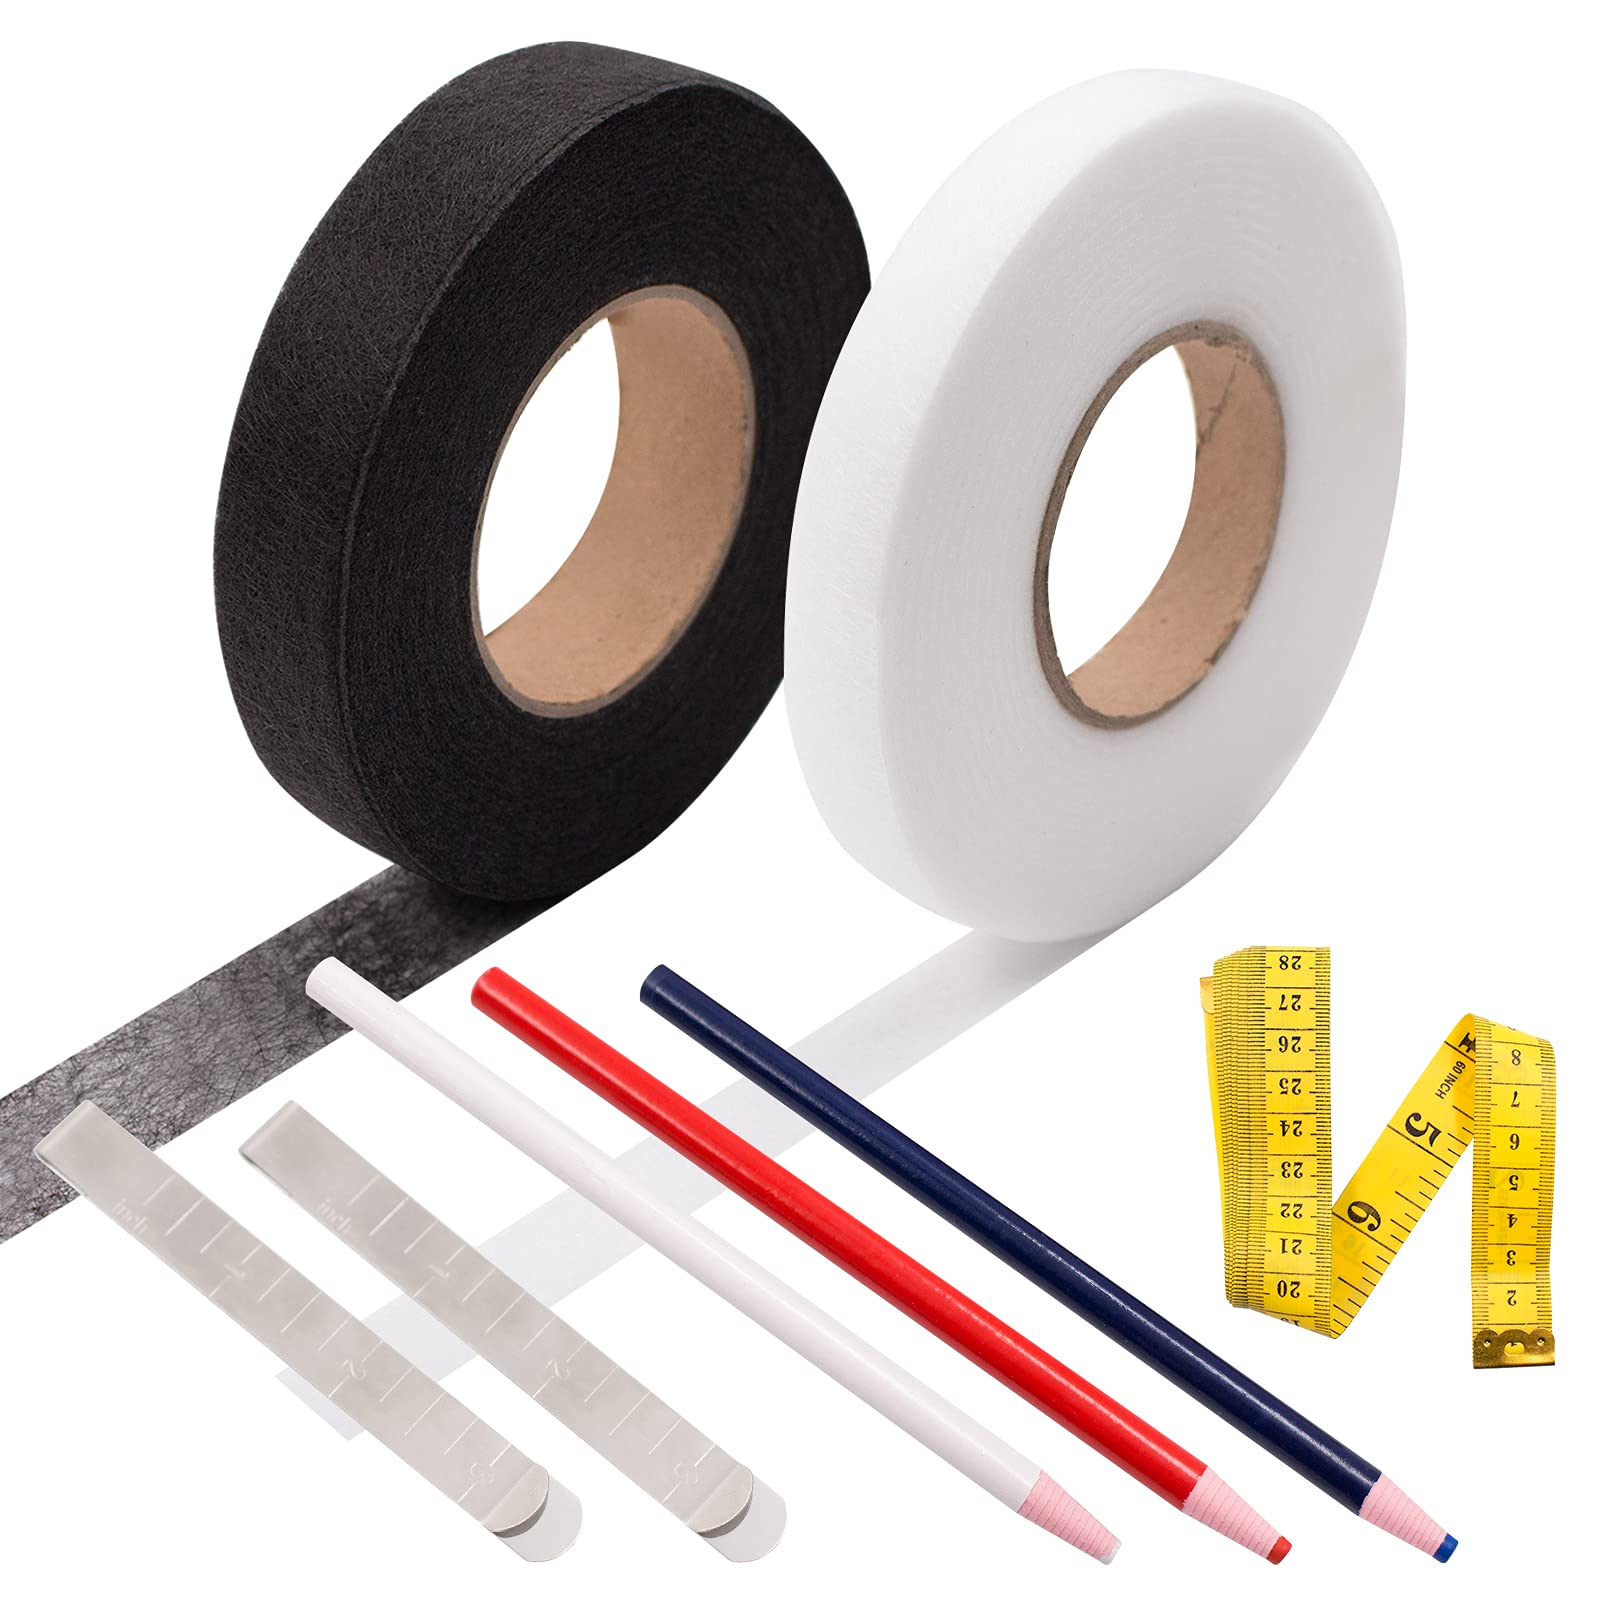 1 Adhesive Cloth Ruler Tape: 7 yds - White